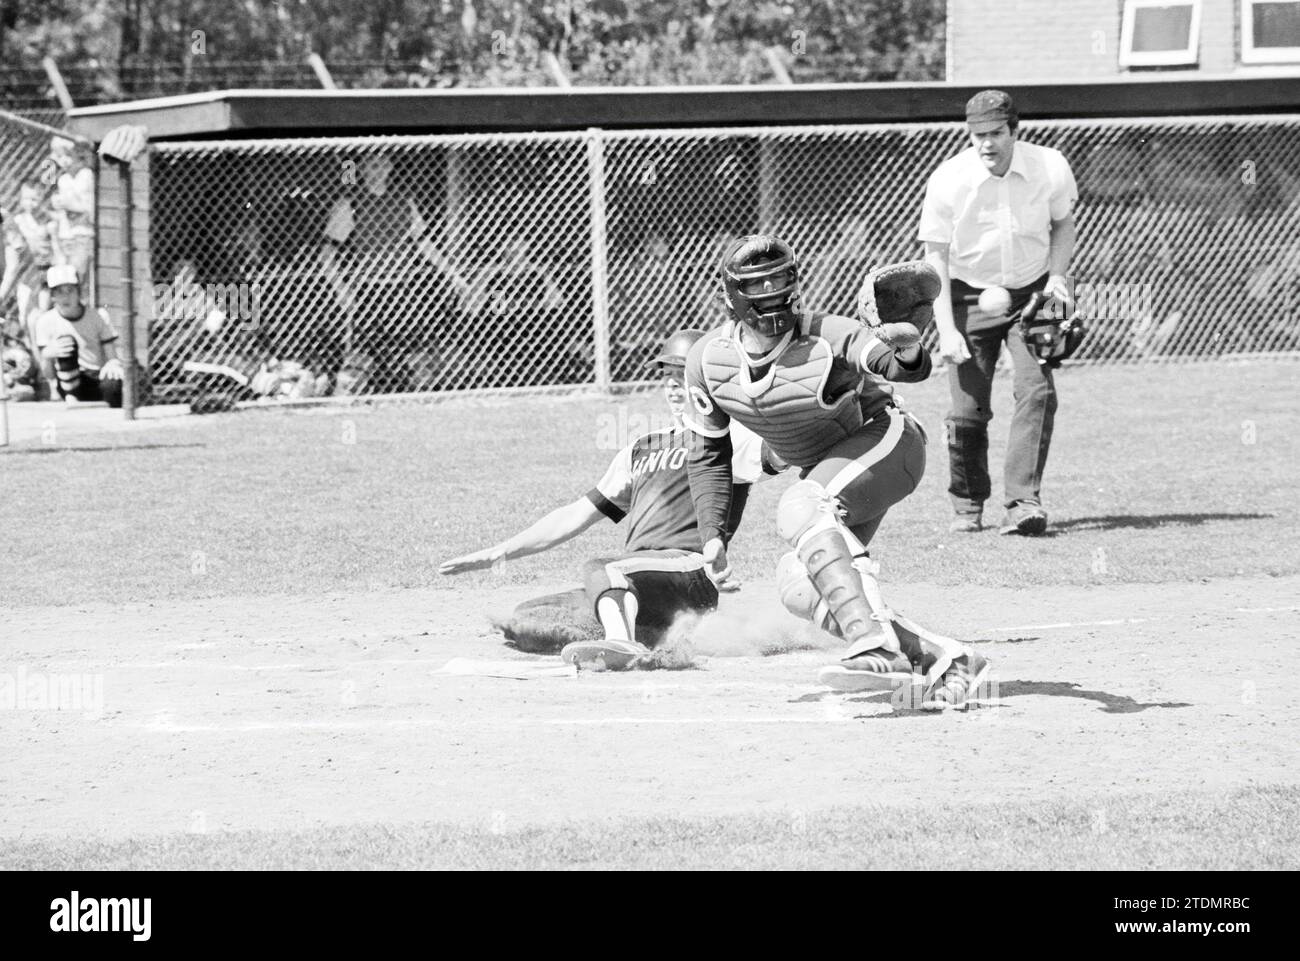 RCH - Shots, Baseball RCH, 11-05-1980, Whizgle News from the Past, Tailored for the Future. Explore historical narratives, Dutch The Netherlands agency image with a modern perspective, bridging the gap between yesterday's events and tomorrow's insights. A timeless journey shaping the stories that shape our future Stock Photo